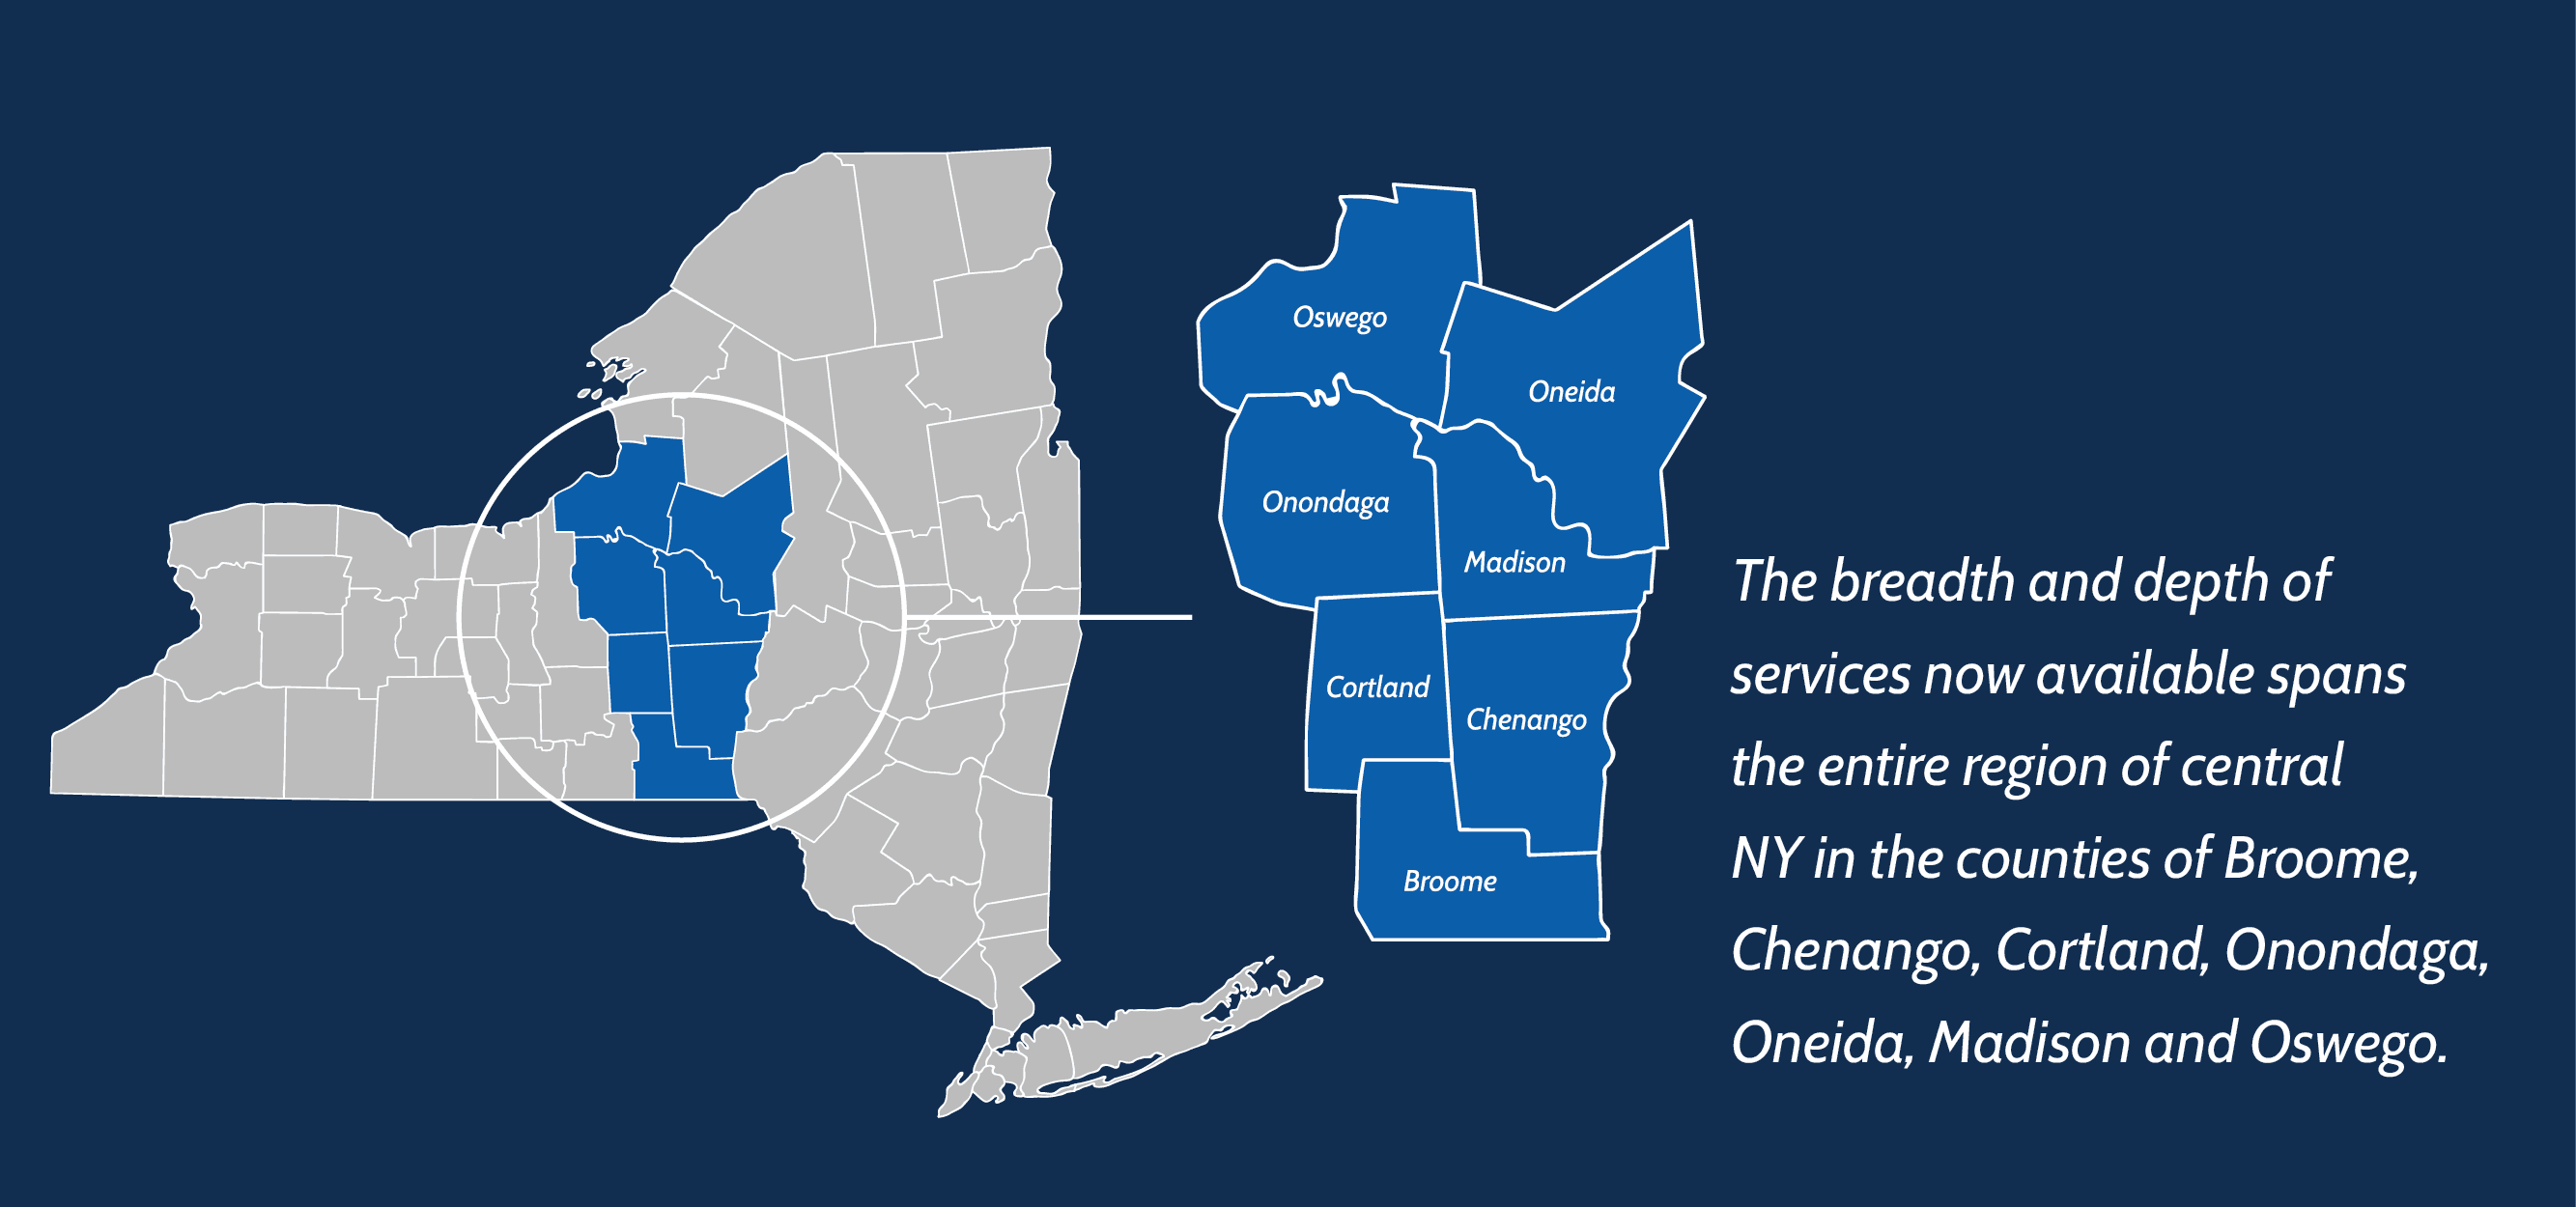 A NY state map of Catholic Charities in the Syracuse Diocese, highlighting the following counties: Broome, Chenango, Cortland, Onondaga, Oneida, Madison and Oswego.